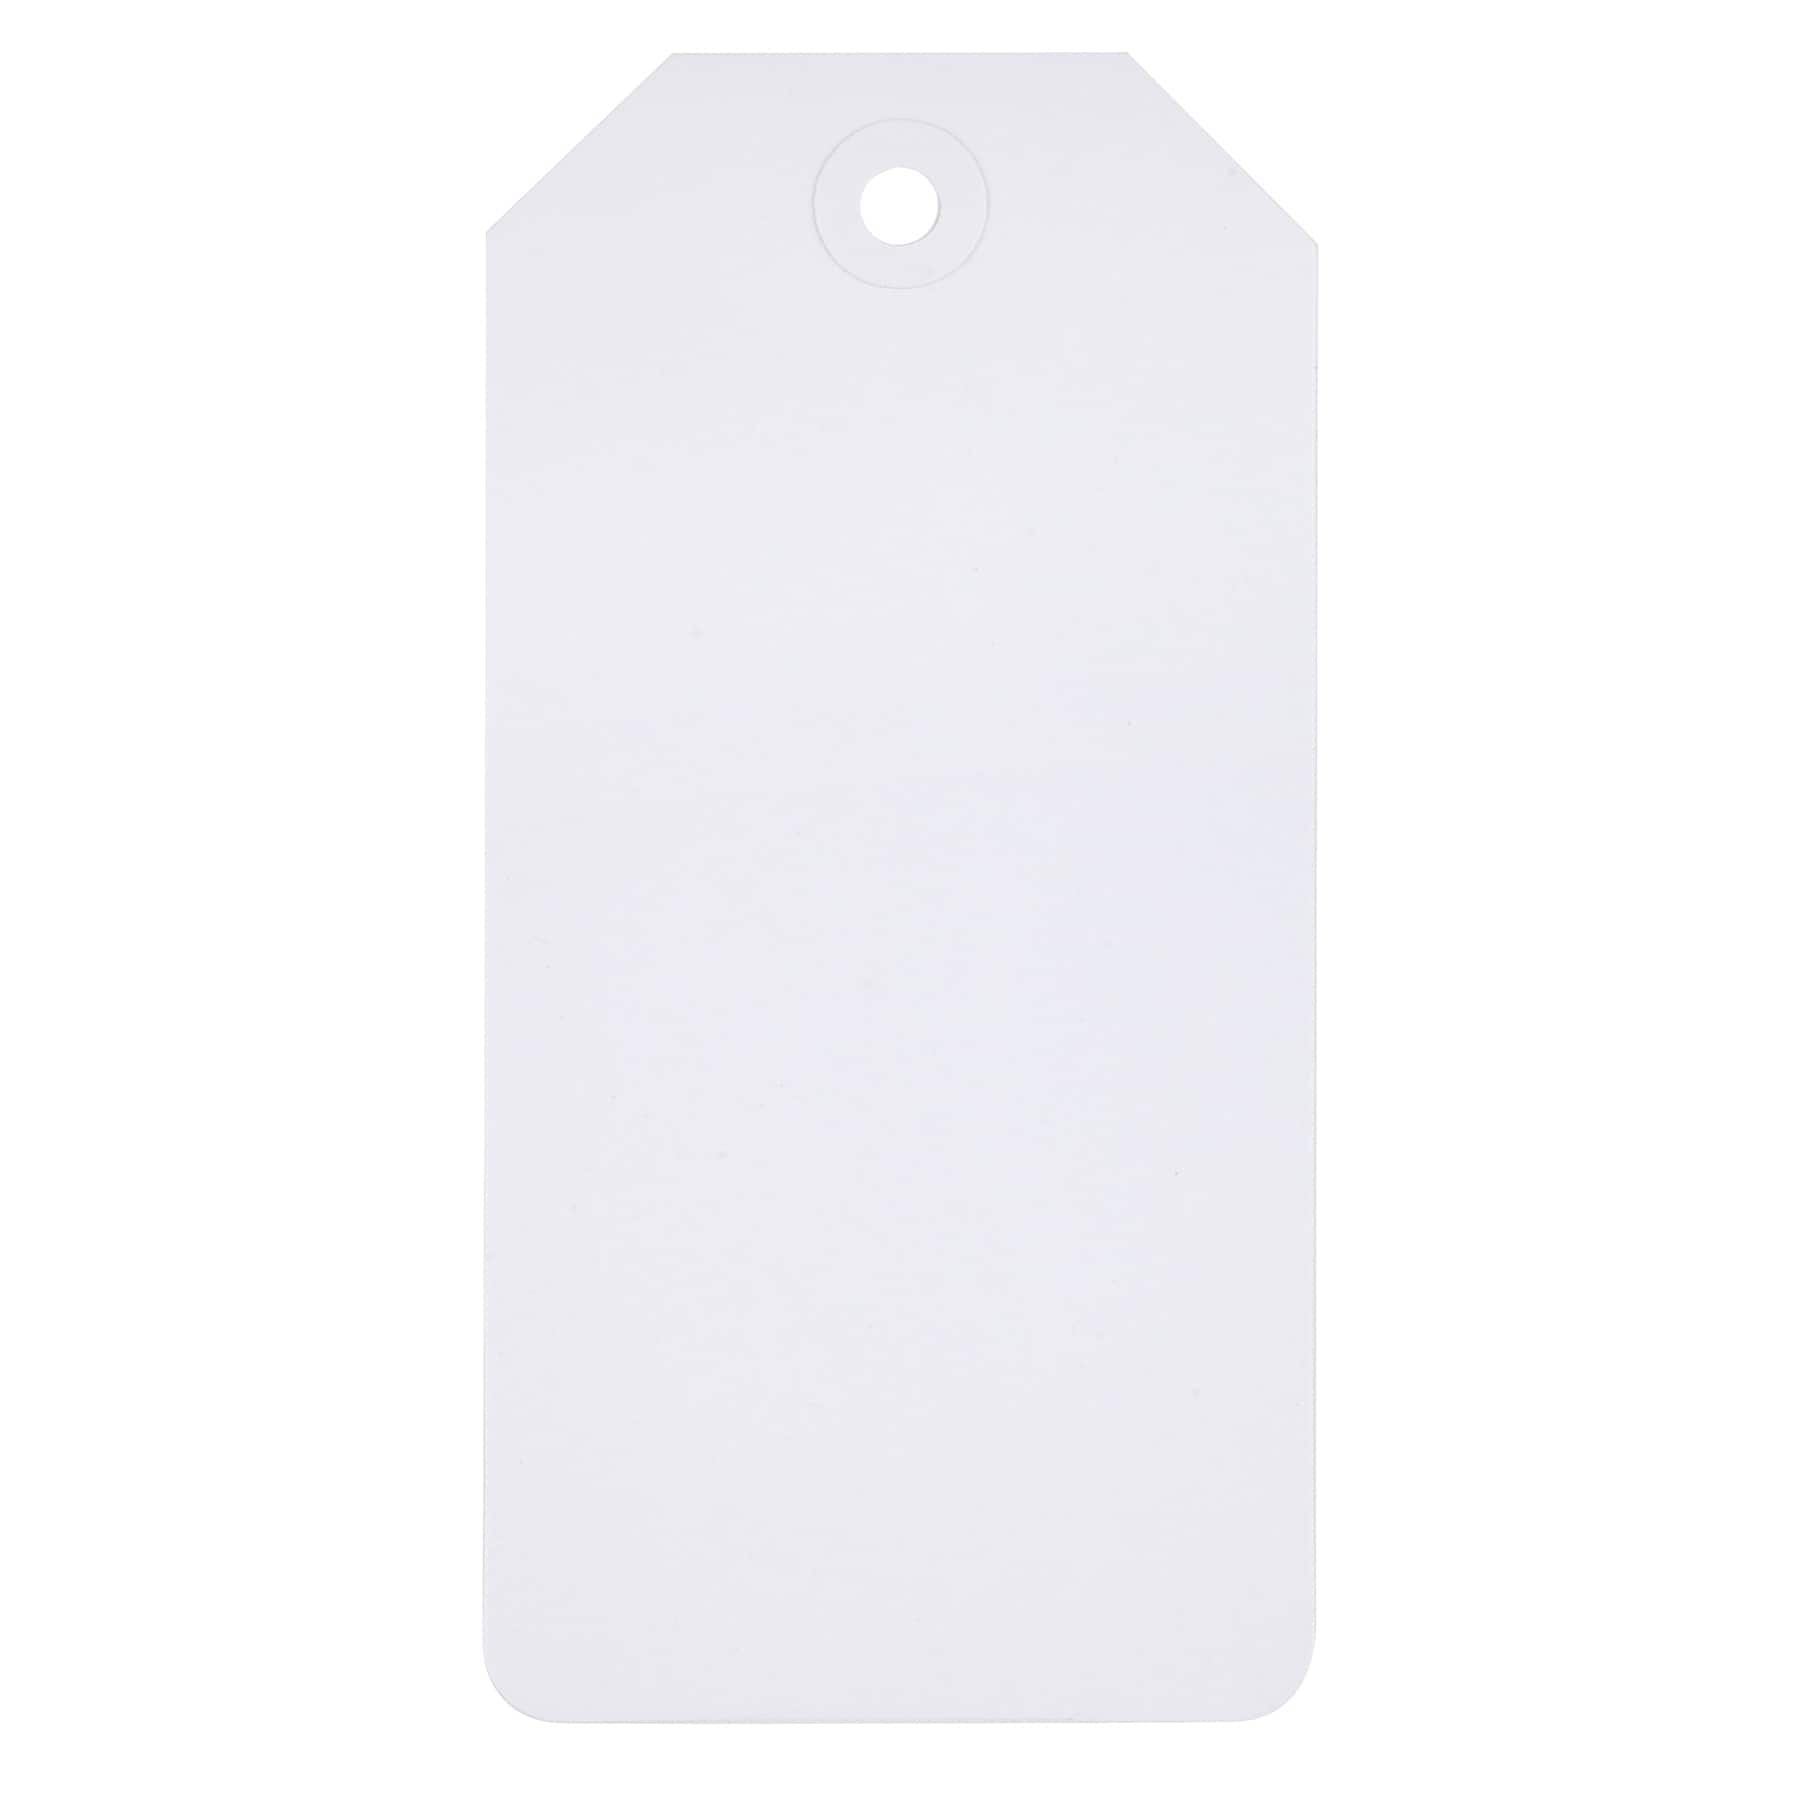 12 Packs: 12 ct. (240 total) Large White Tags by Recollections&#x2122;